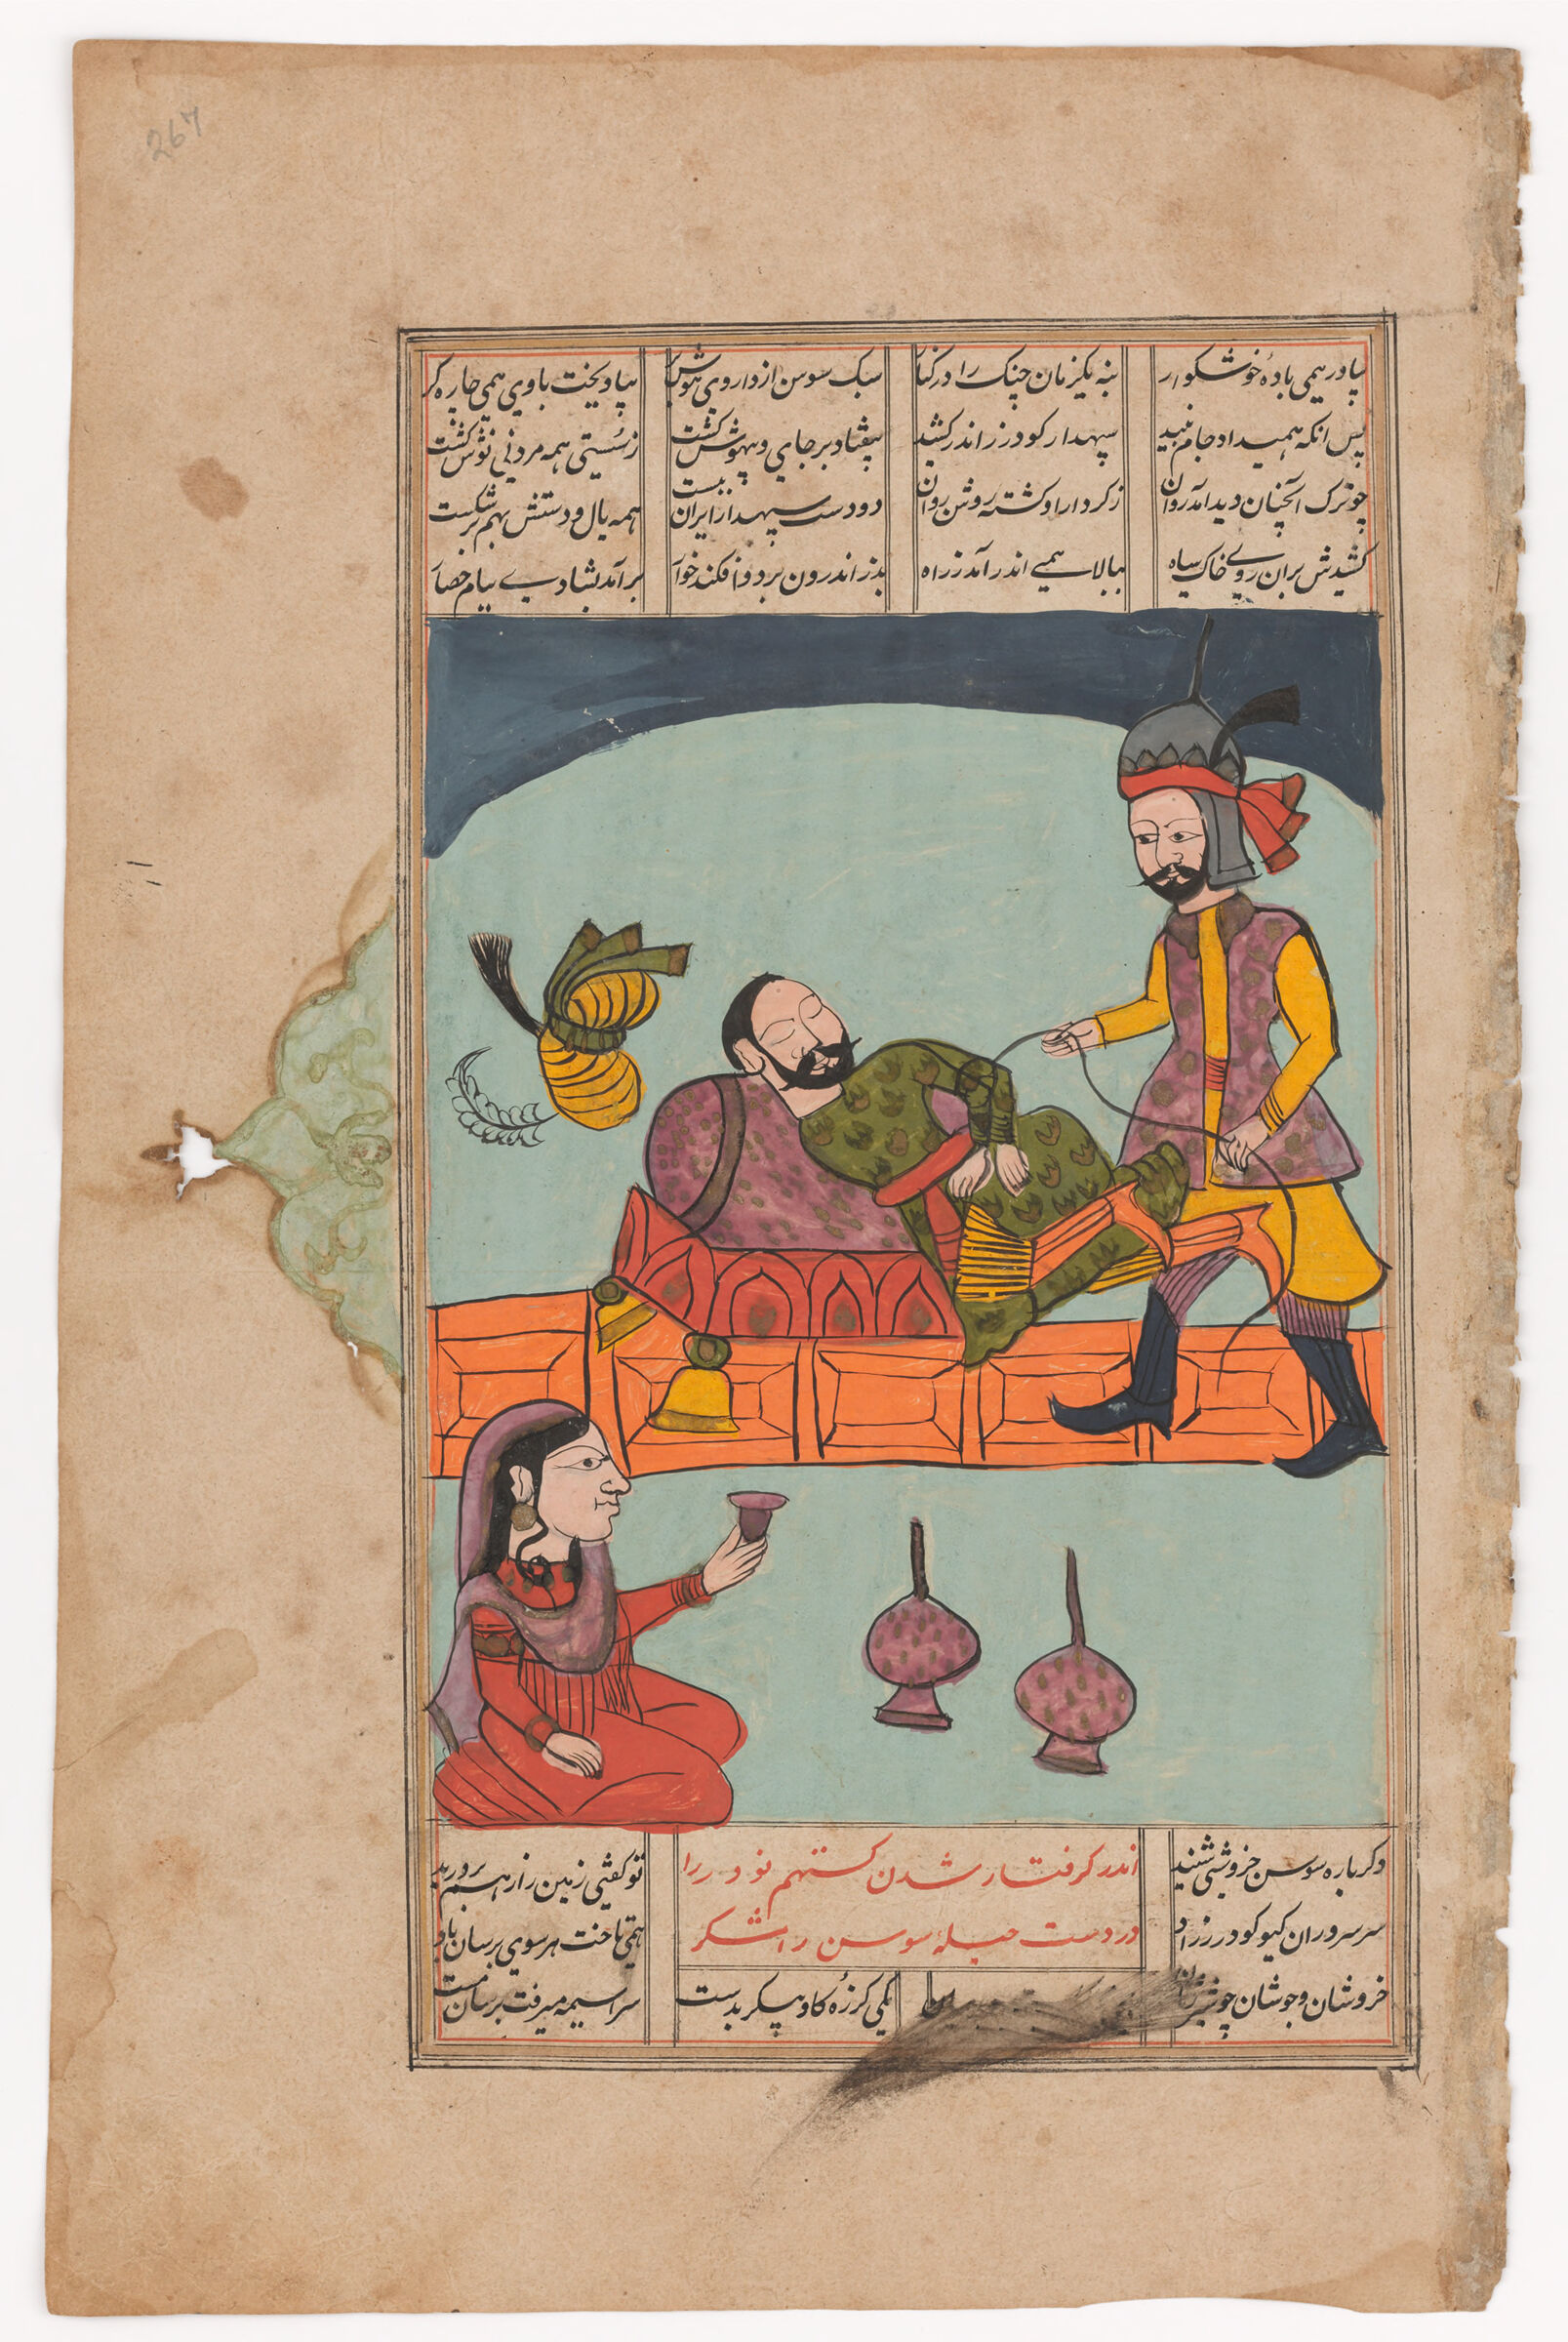 Gudarz Falls Under The Spell Of Susan (Painting Recto; Text Verso Of Folio 267), Illustrated Folio From A Manuscript Of The Shahnama By Firdawsi